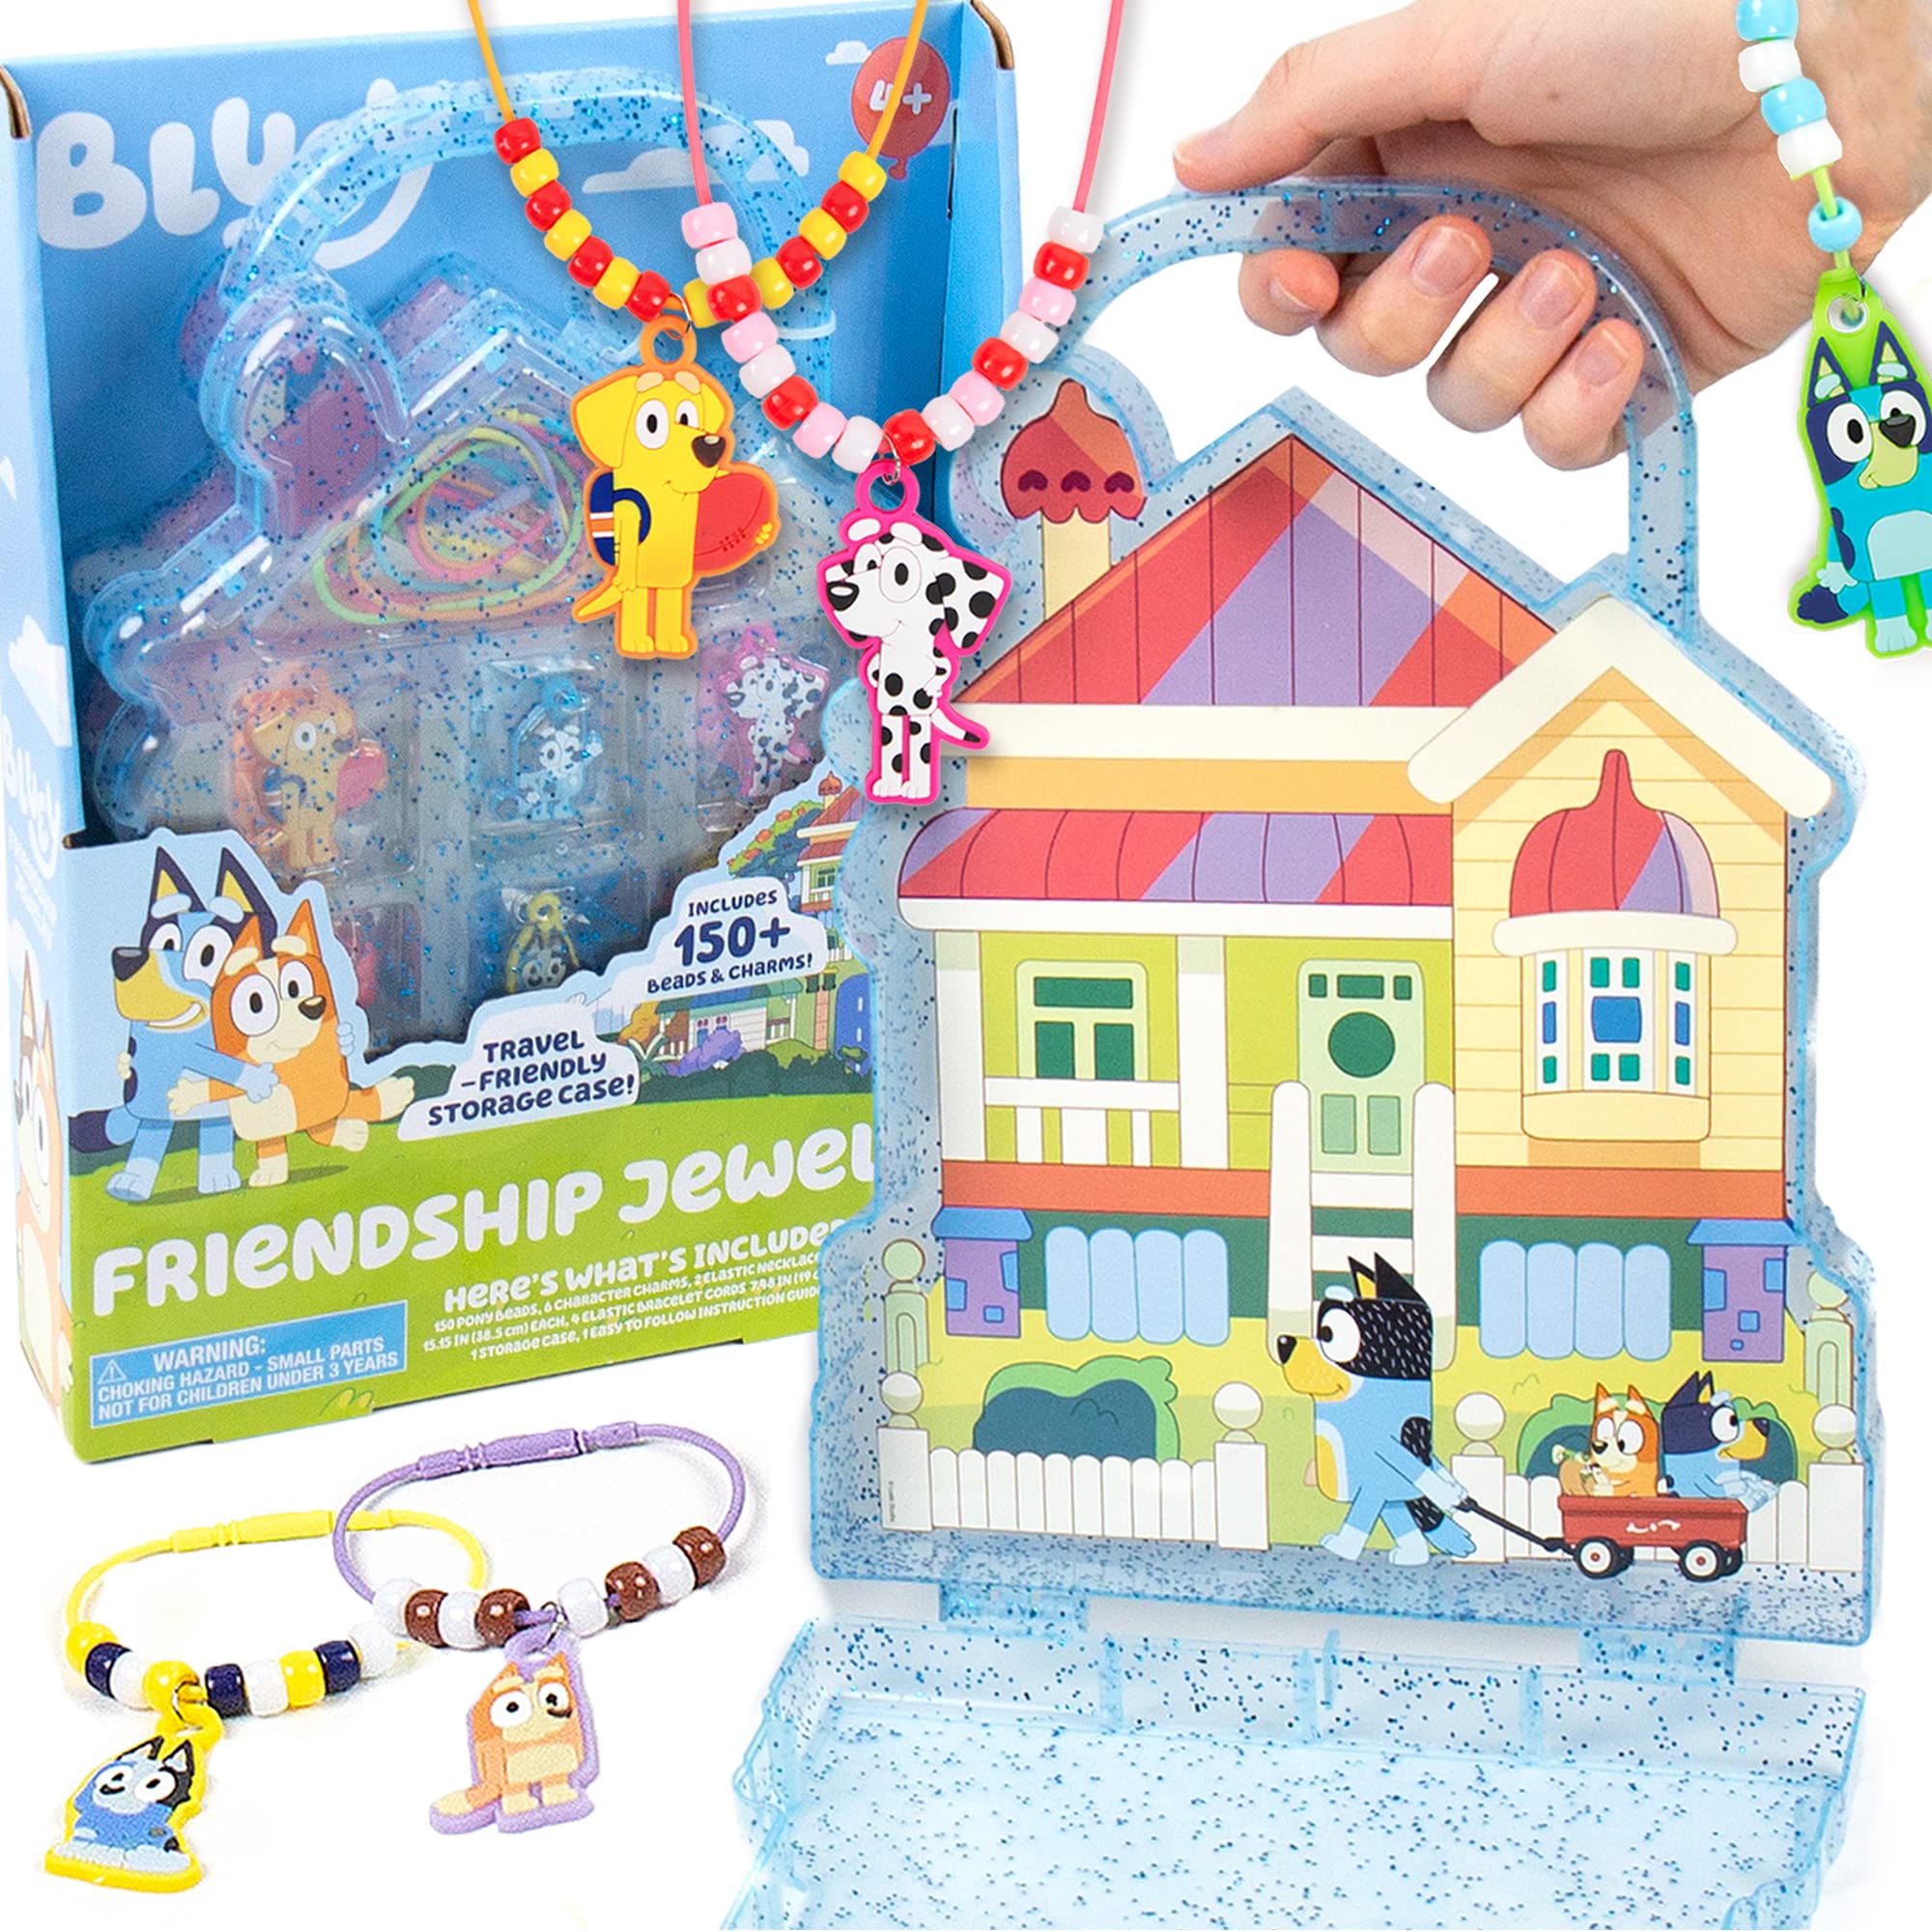 Horizon Group USA Bluey Friendship Jewelry, Create 4 Bluey Charm Bracelets & 2 Bluey Charm Necklaces, Includes 150 Beads & 6 Rubber Charms with Bluey Storage Case, Gifts for Kids Boys Girls